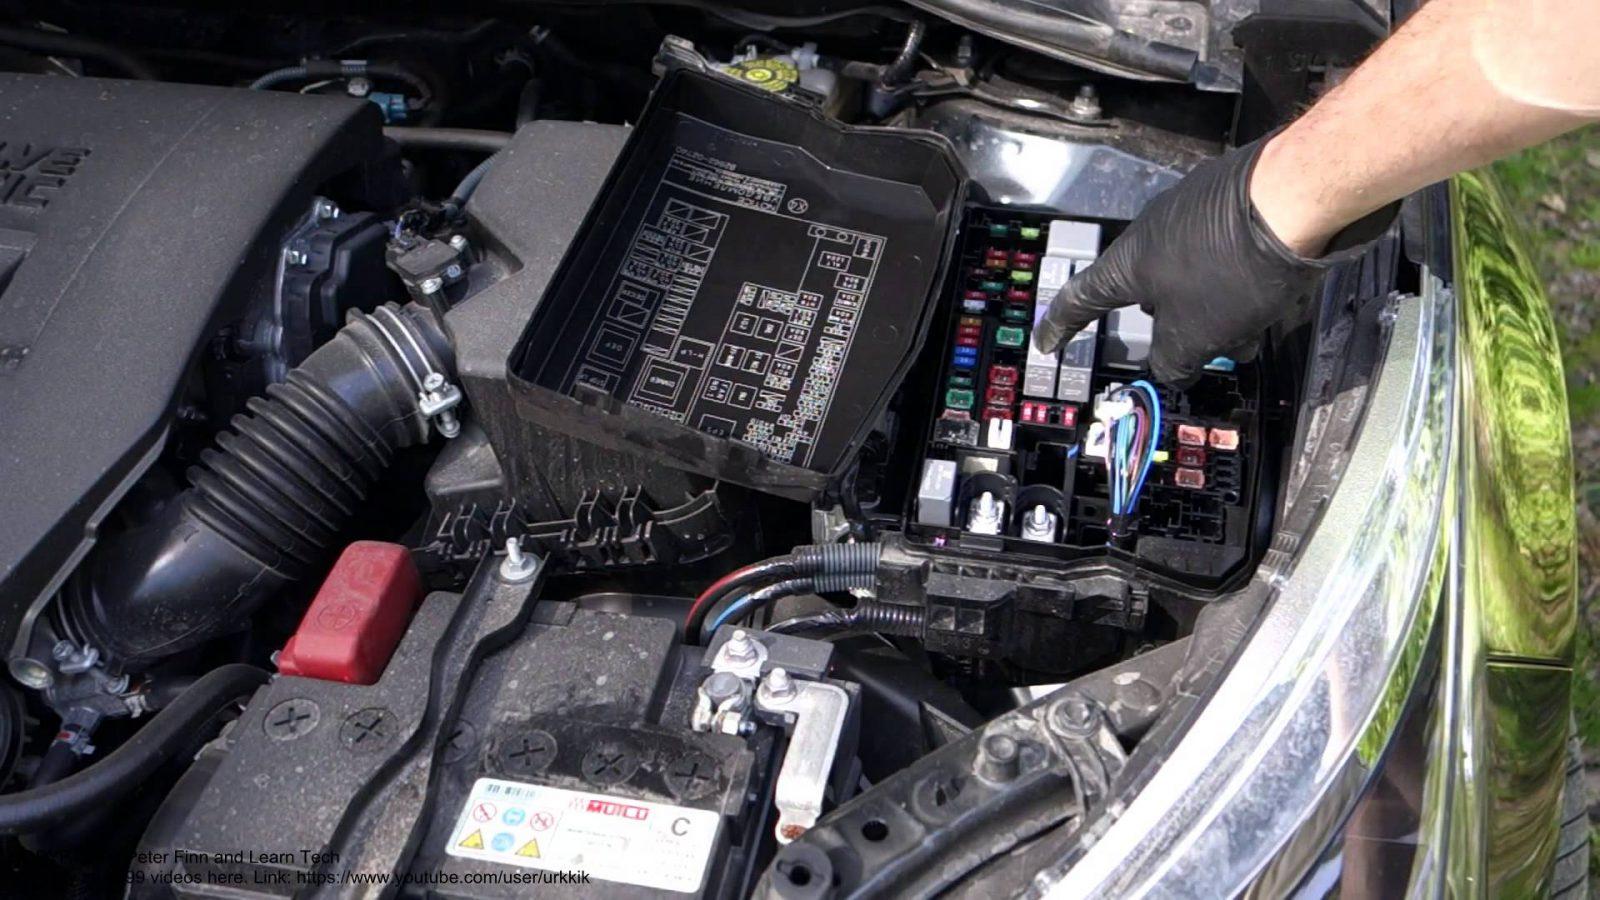 How To Detect And Replace A Blown Fuse In Car - CAR FROM JAPAN blown electrical fuse box 